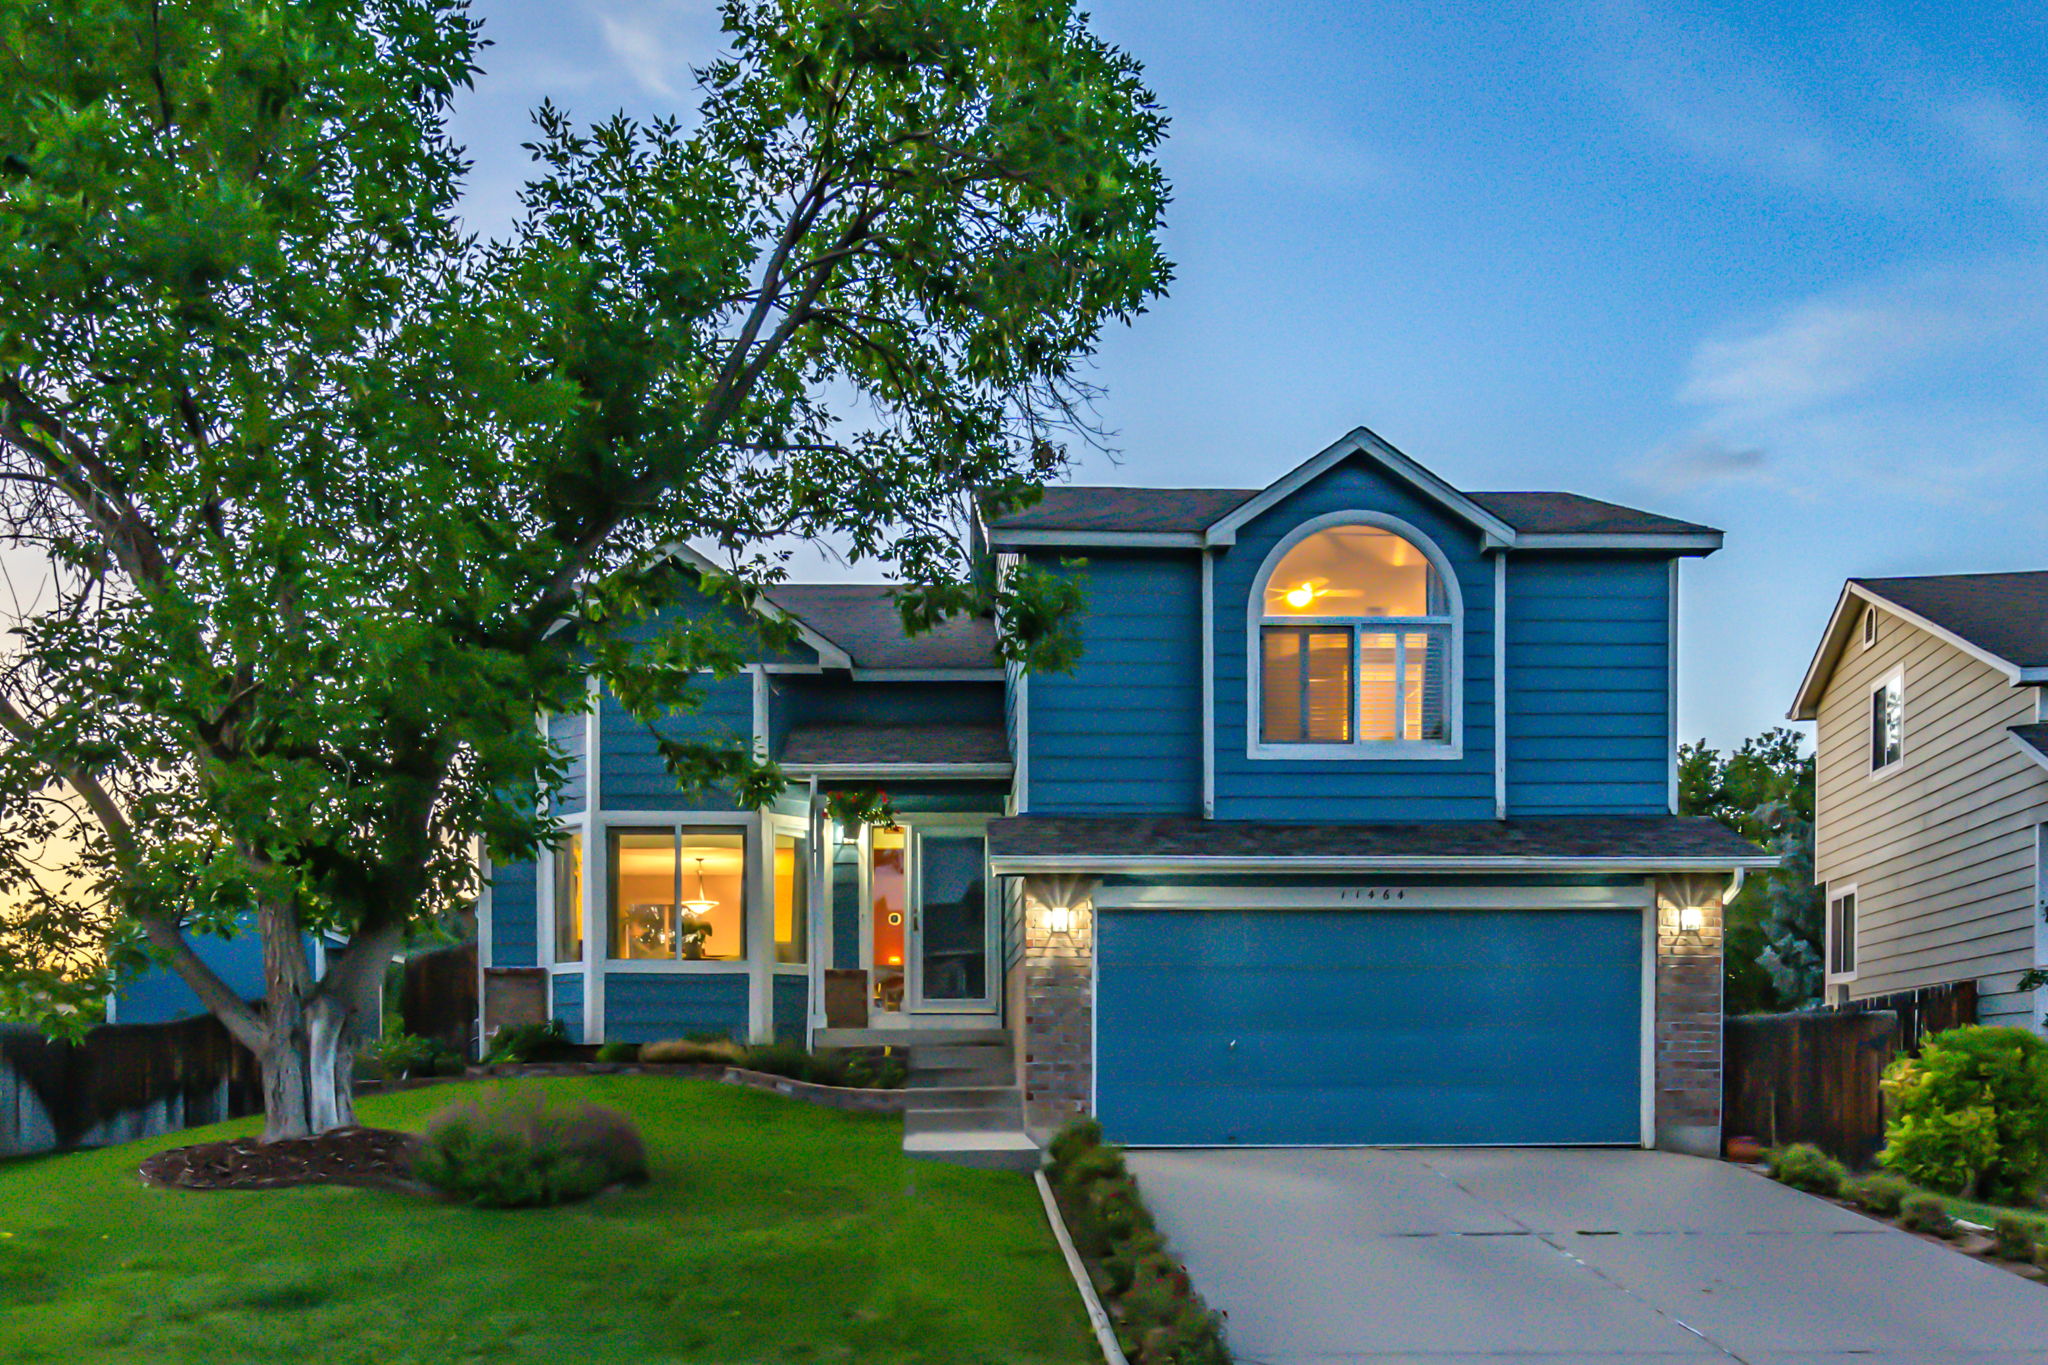  11464 Chase Way, Broomfield, CO 80020, US